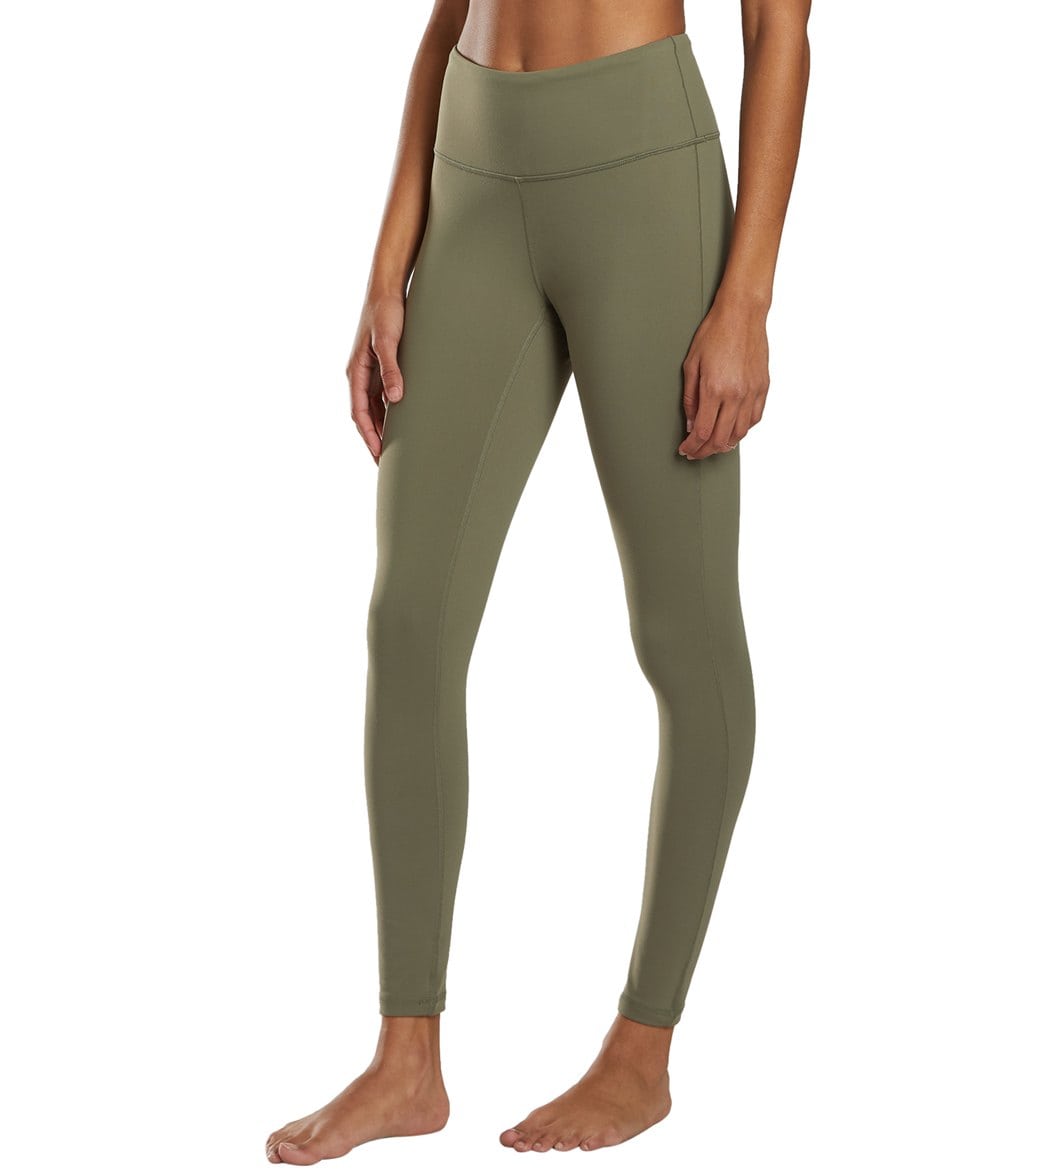 Lululemon Stretch High-rise Pants 7/8 Length In Bronze Green